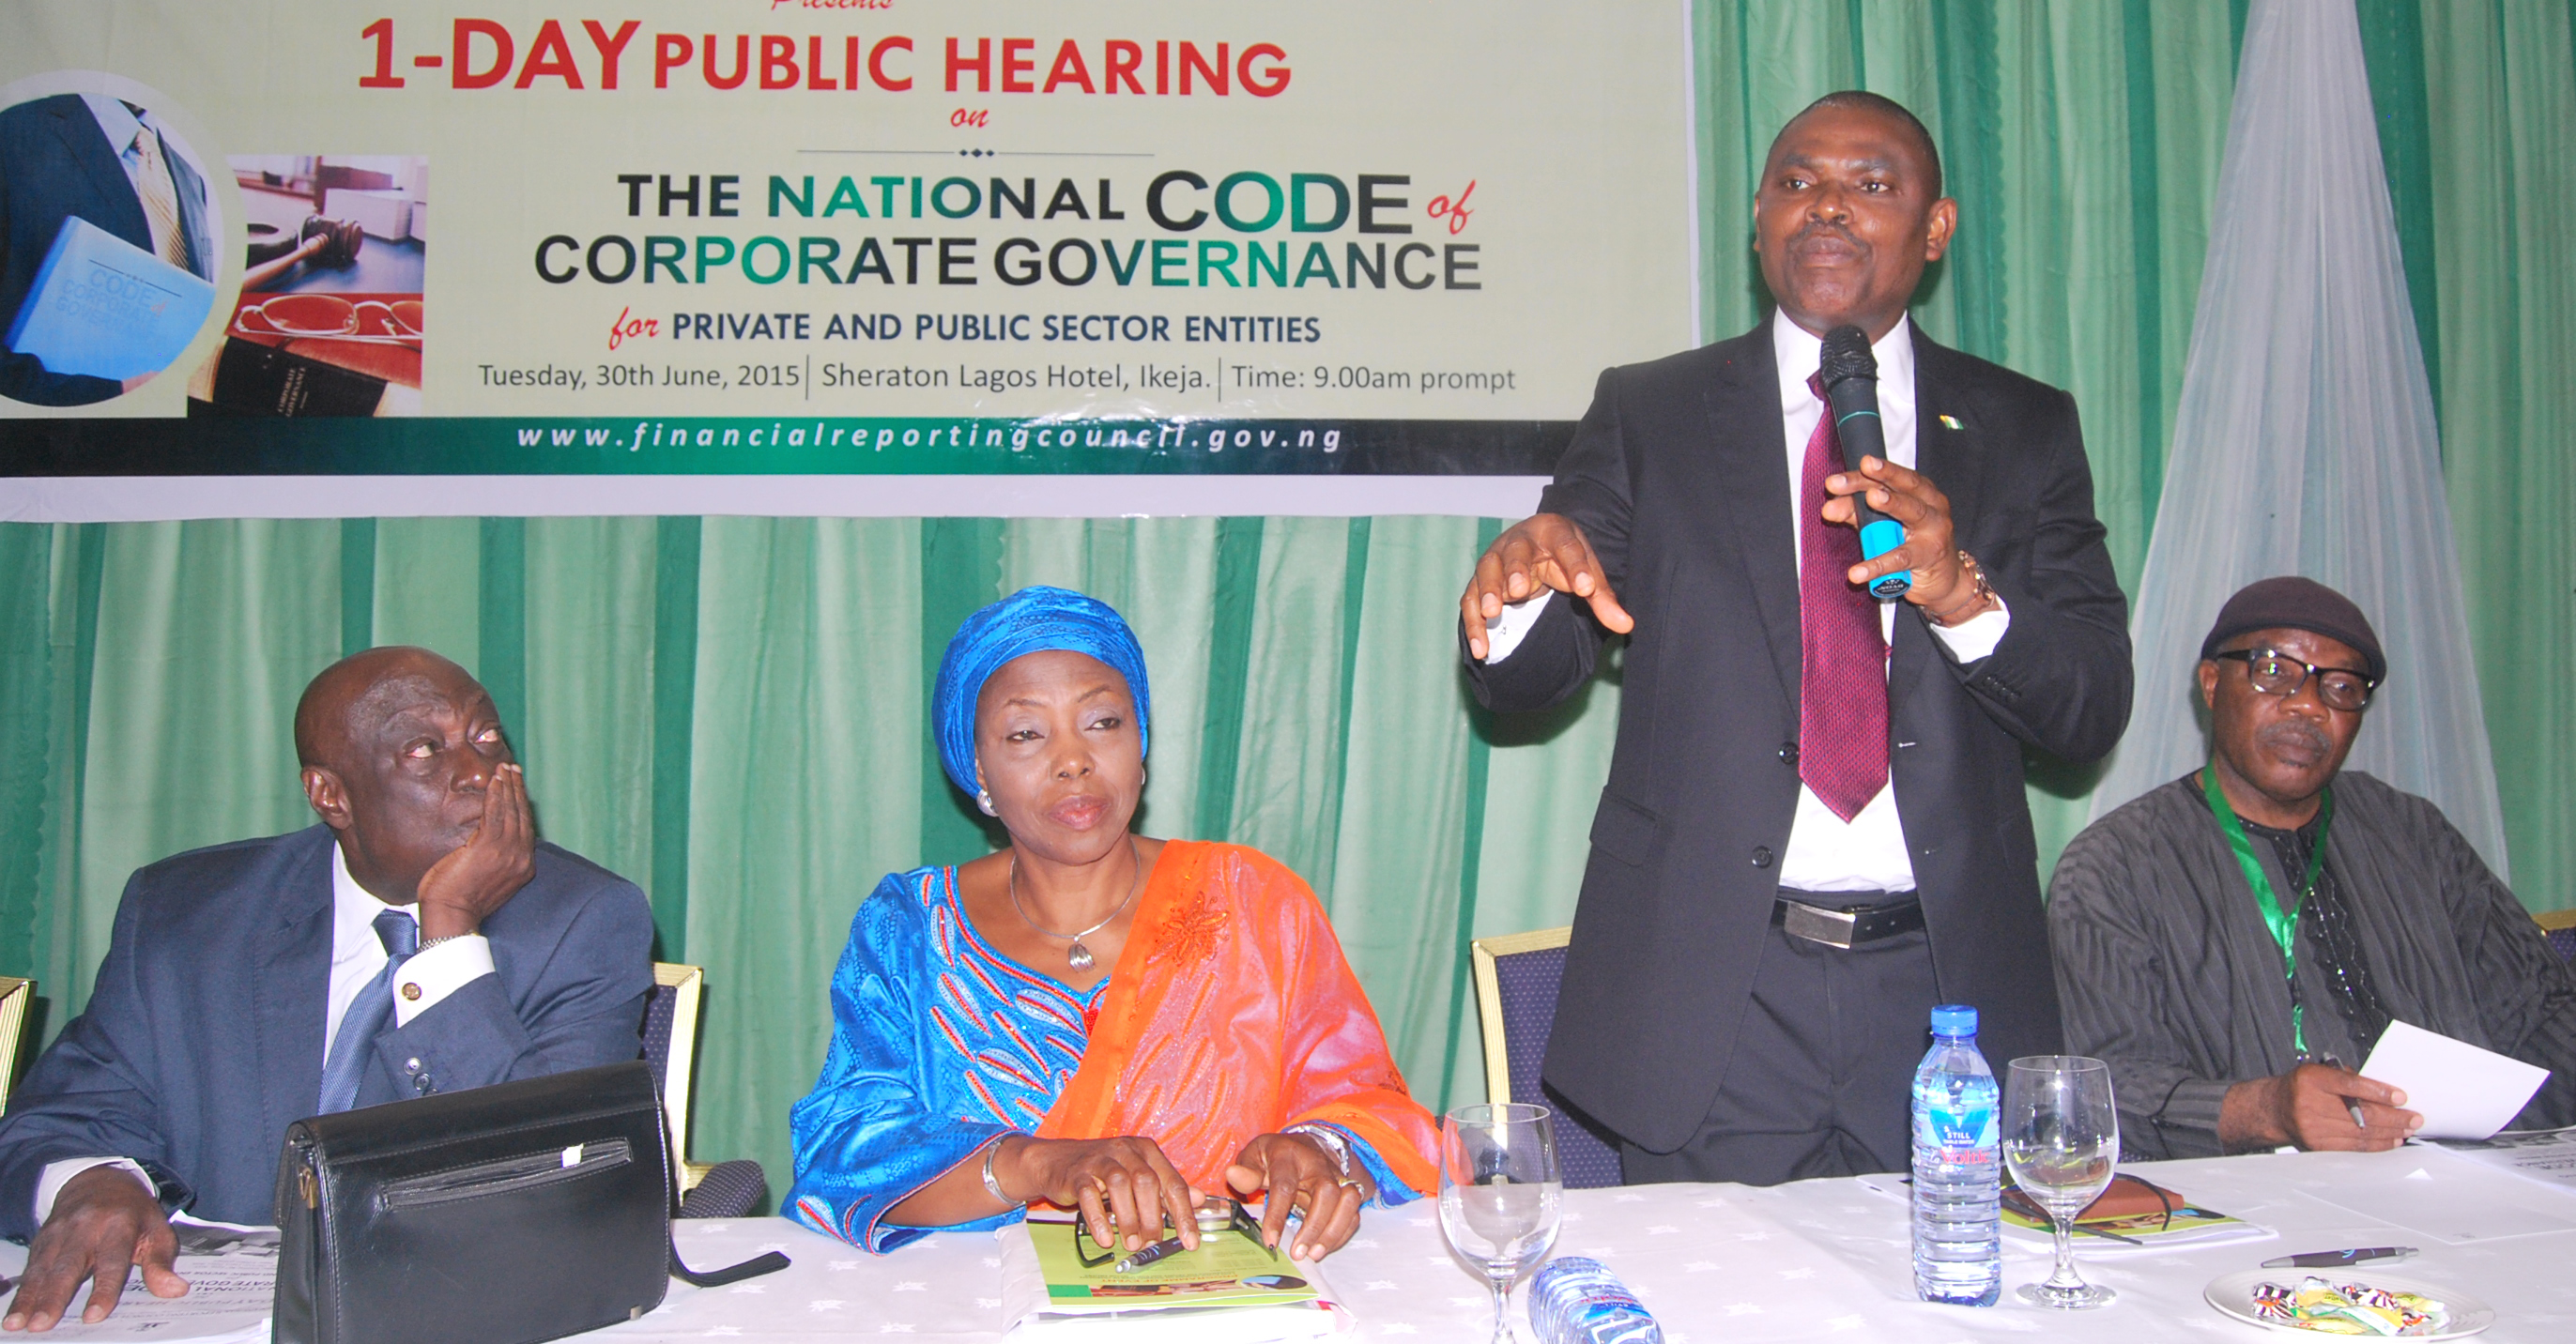 L-R Mr Victor Odiase, Chairman, Steering Committee, National Code of Corporate Governance; Hajiya Maryam Ladi-Ibrahim, Chairman, Financial Reporting Council of Nigeria (FRC); Mr Jim Obazee, Executive Secretary/CEO,FRC; and Sir Sunny Nwosu, Chairman, Shareholders Association of Nigeria, during the One-day Public Hearing on the National Code of Corporate Governance for Private and Public Sector Entities organised by the Financial Reporting Council of Nigeria held in Lagos